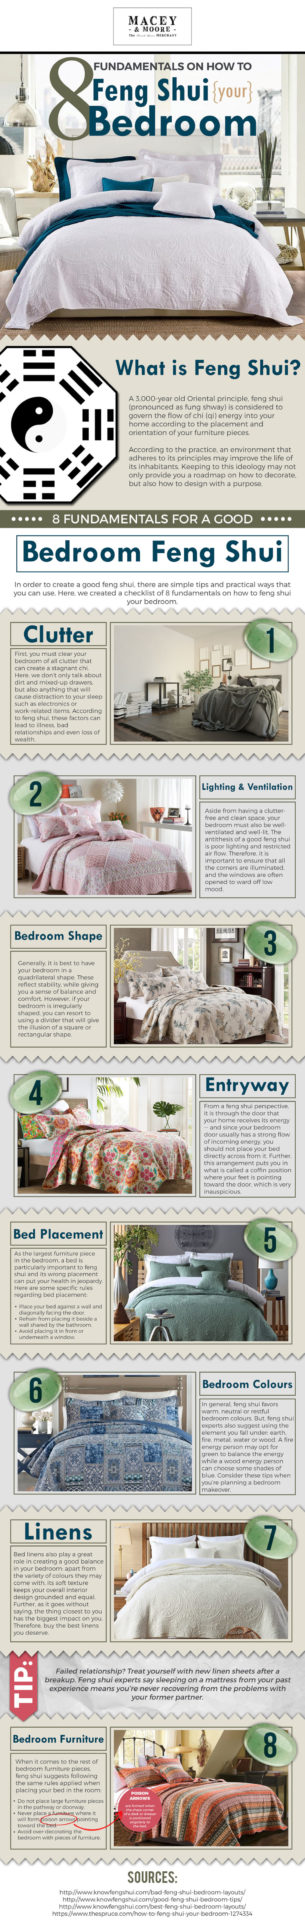 8 Fundamentals on How to Feng Shui your Bedroom